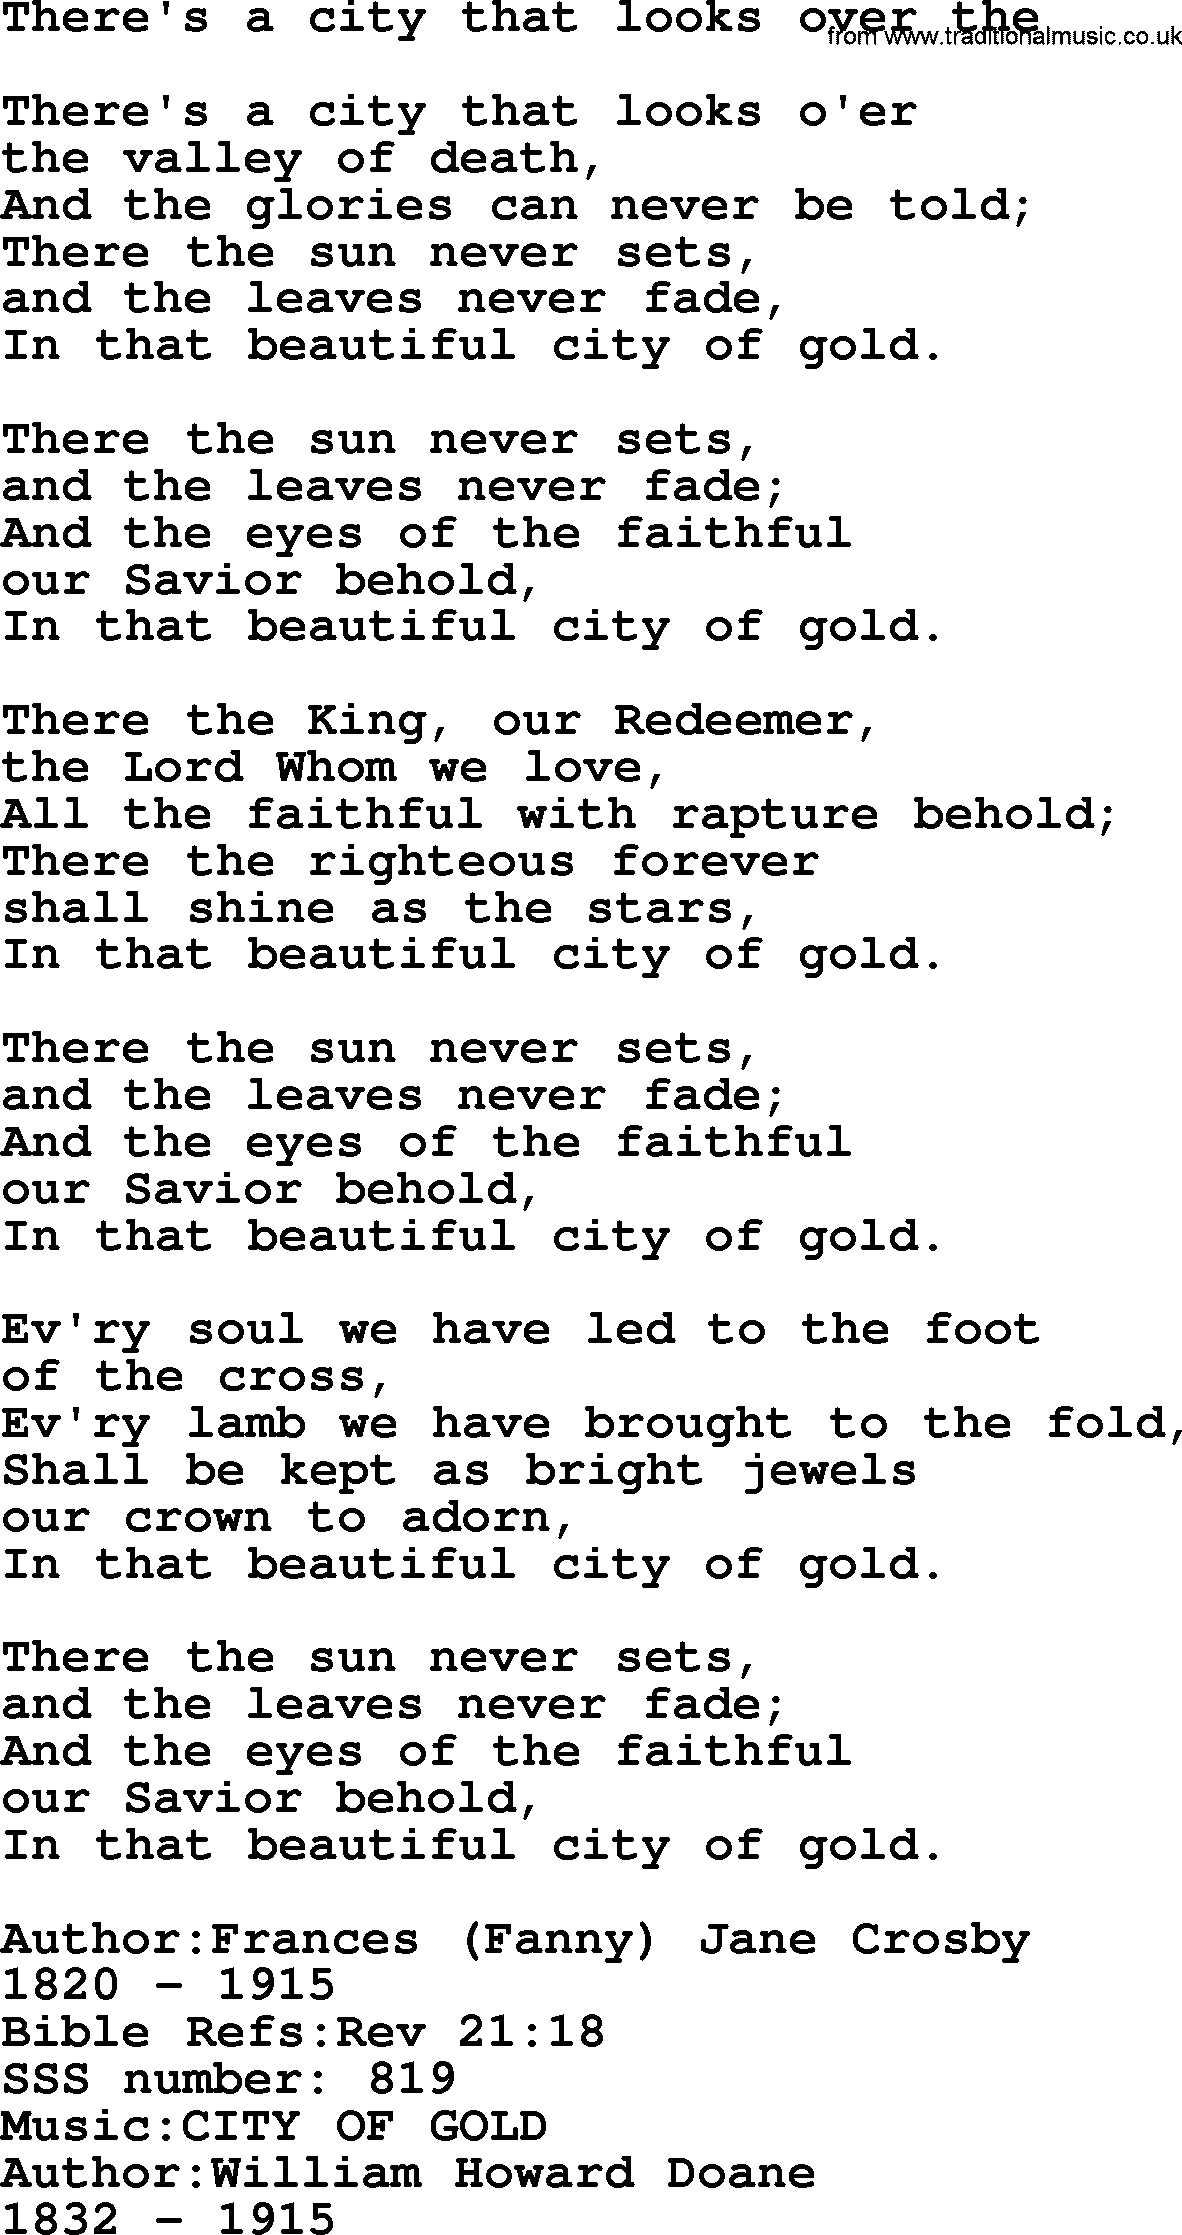 Sacred Songs and Solos complete, 1200 Hymns, title: There's A City That Looks Over The, lyrics and PDF